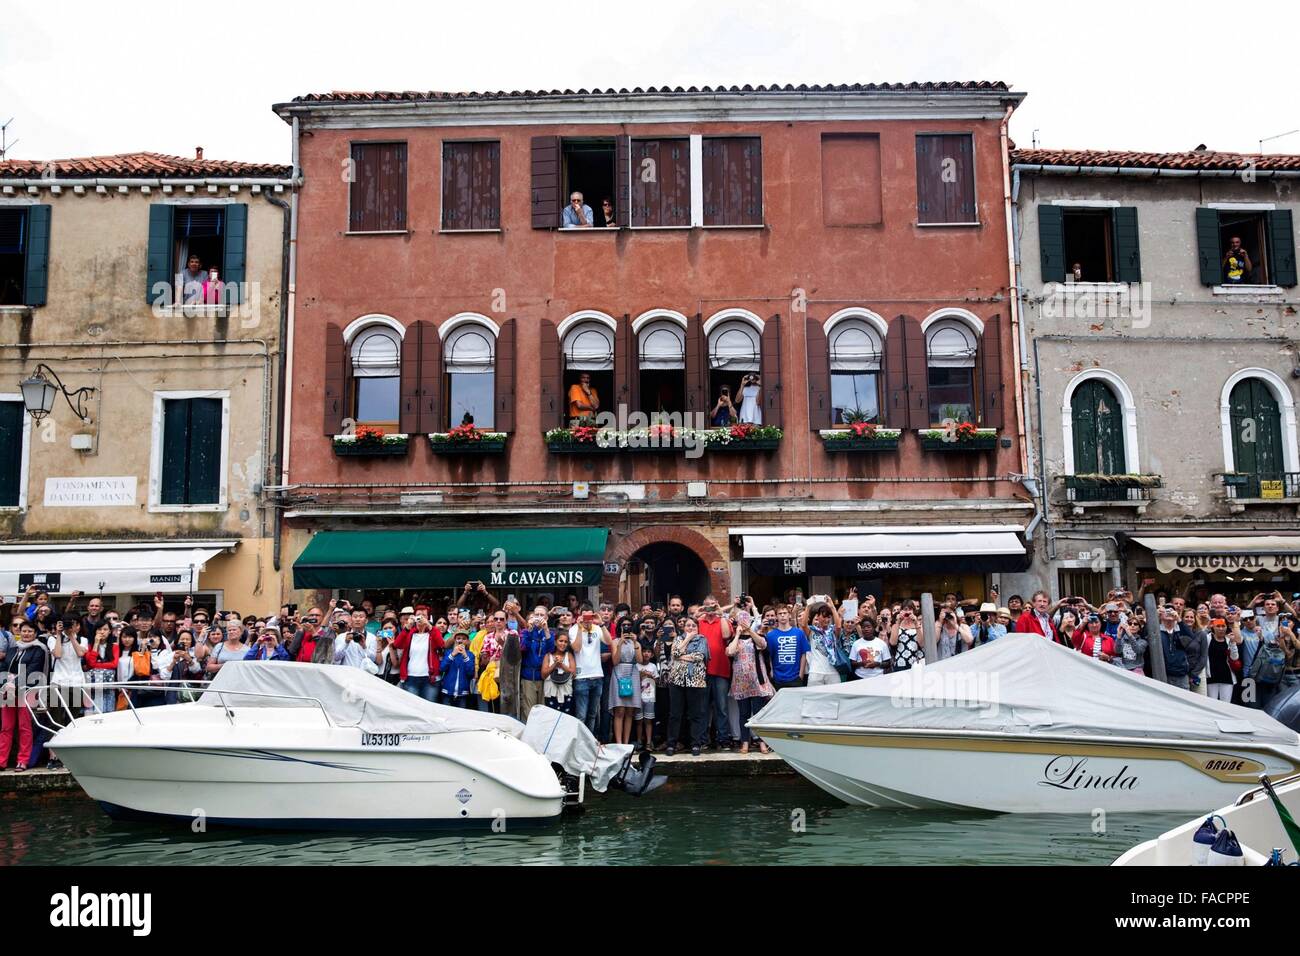 Crowds of onlookers gather to get a glimpse of the U.S First Lady Michelle Obama during her visit June 20, 2015 in Venice, Italy. Stock Photo